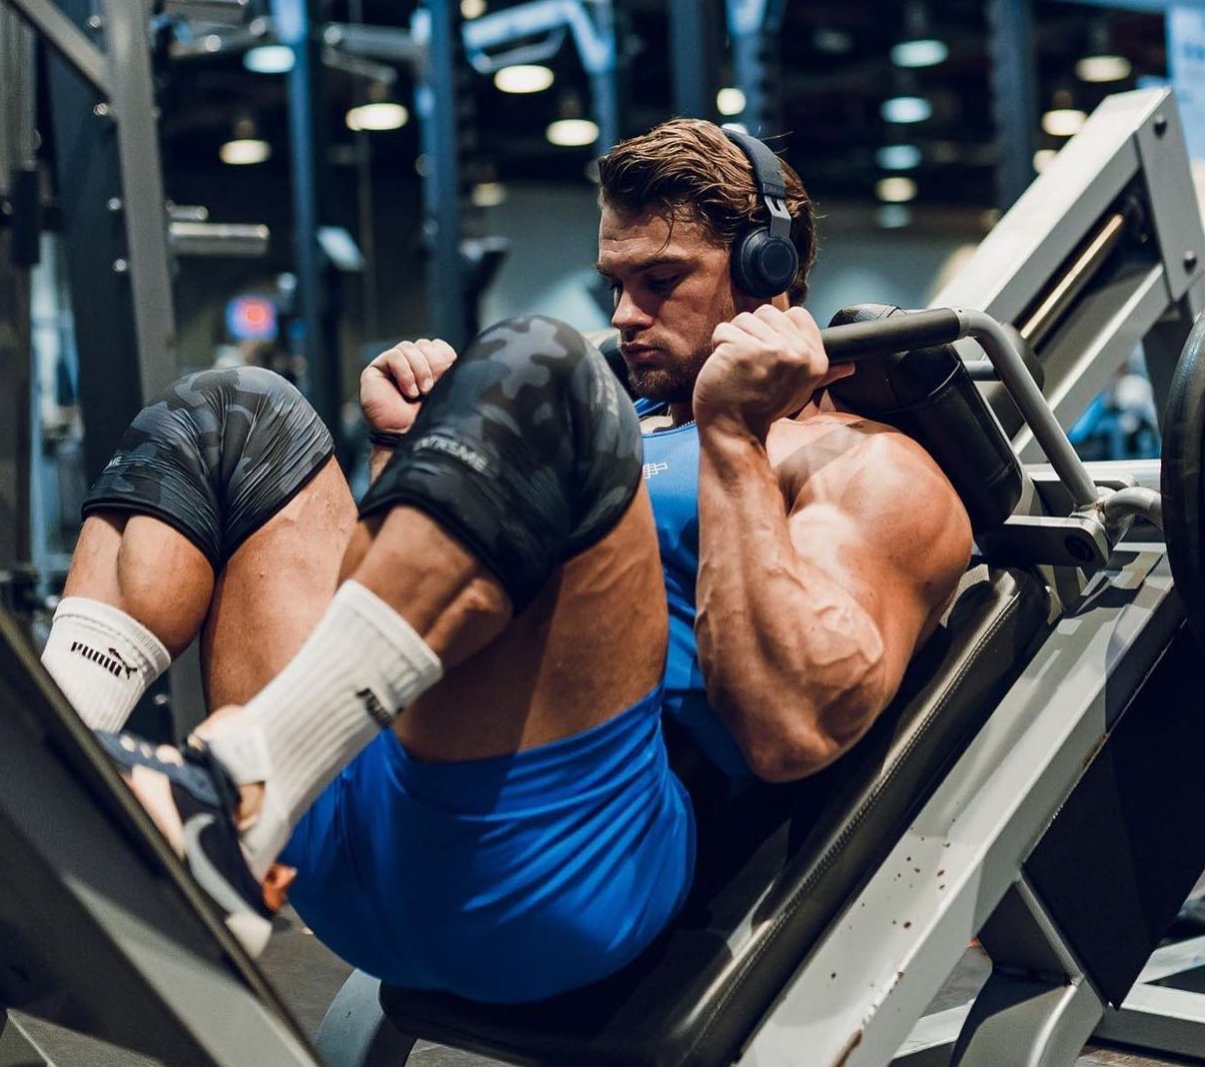 How to do the leg press correctly